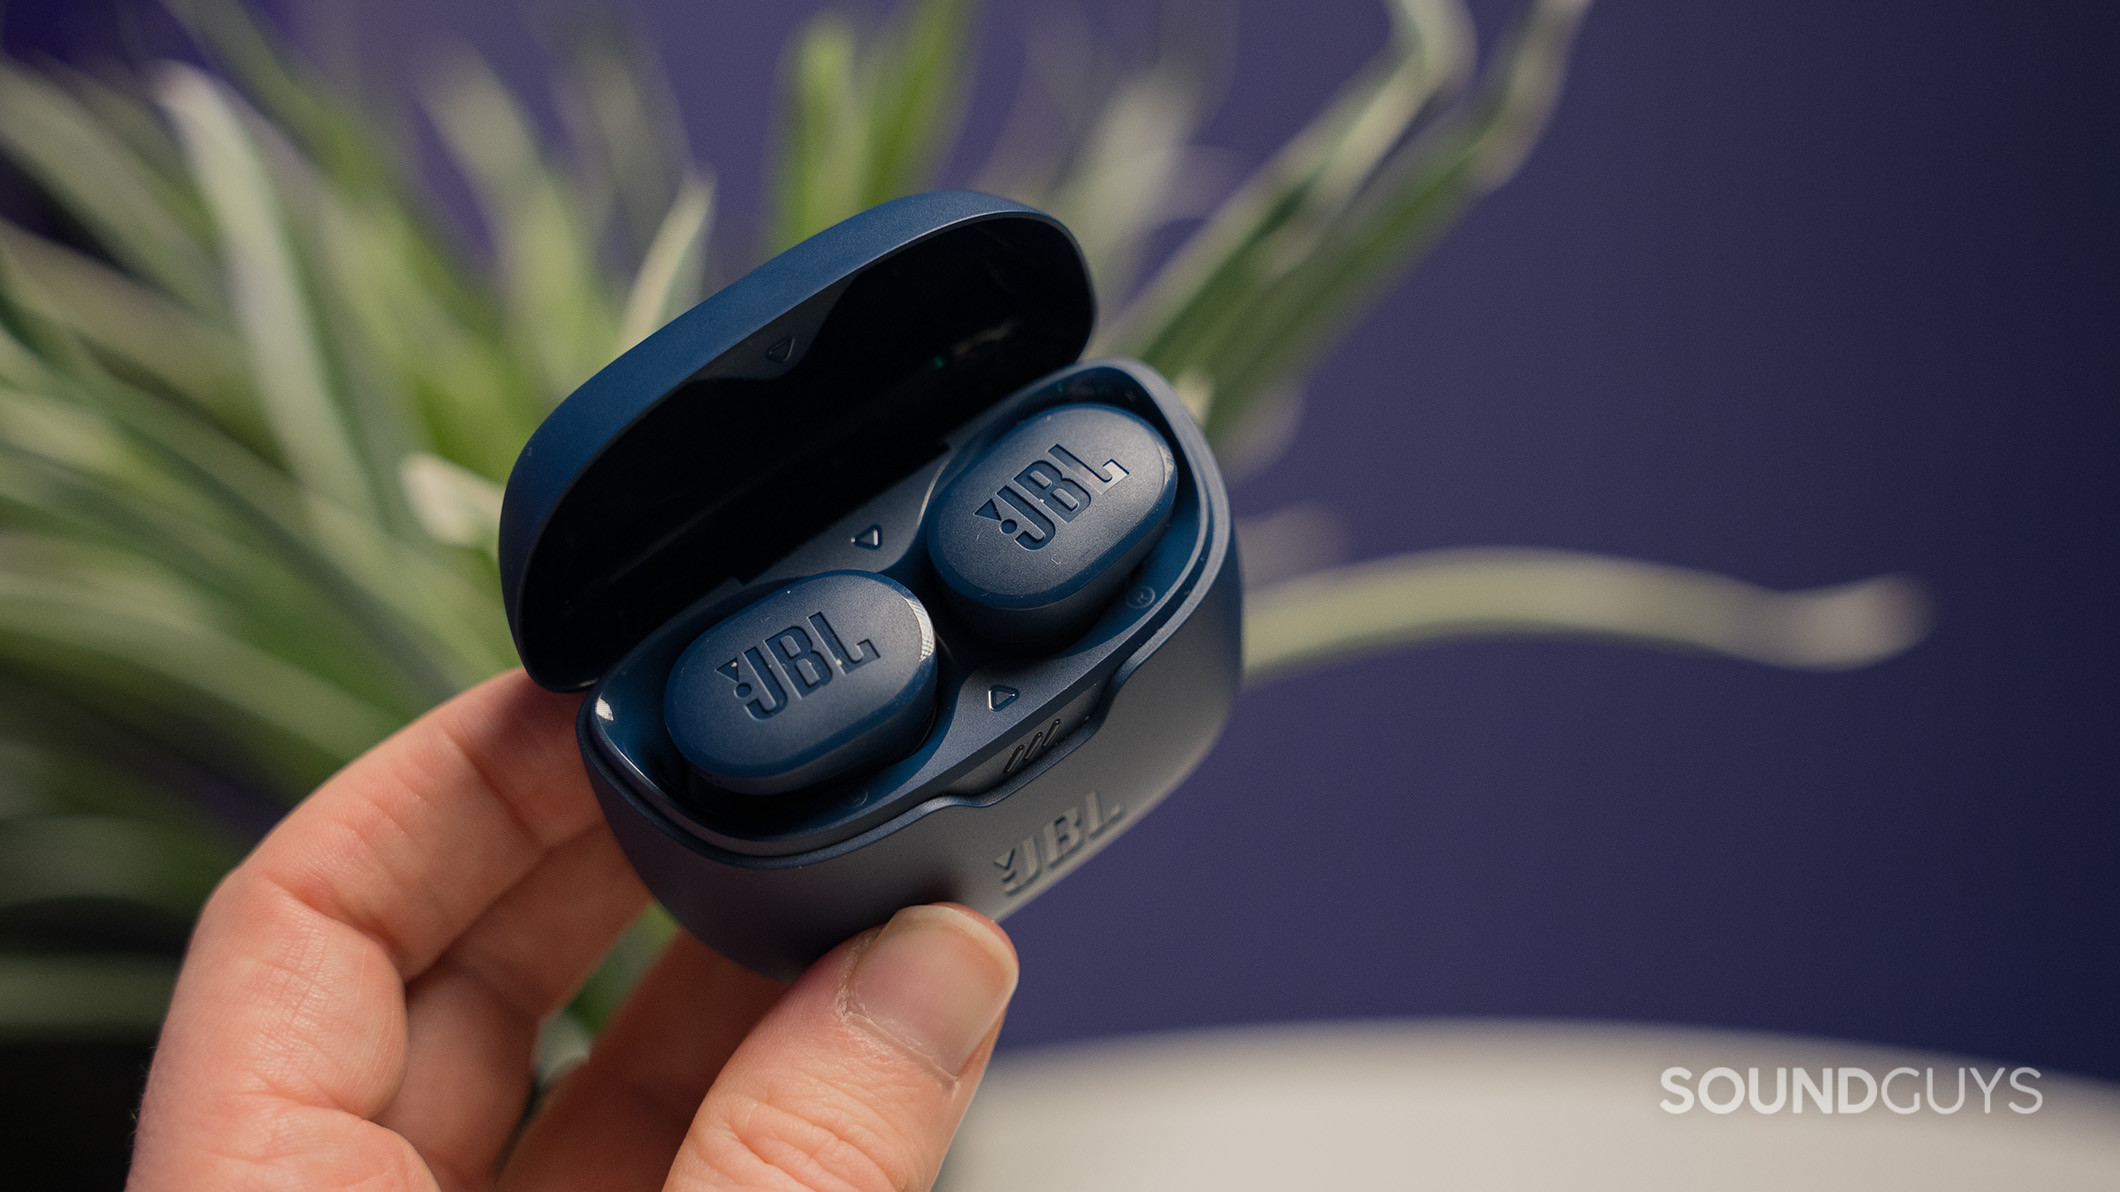 A hand shows the JBL Tune Buds in their charging case in front of a plant. 